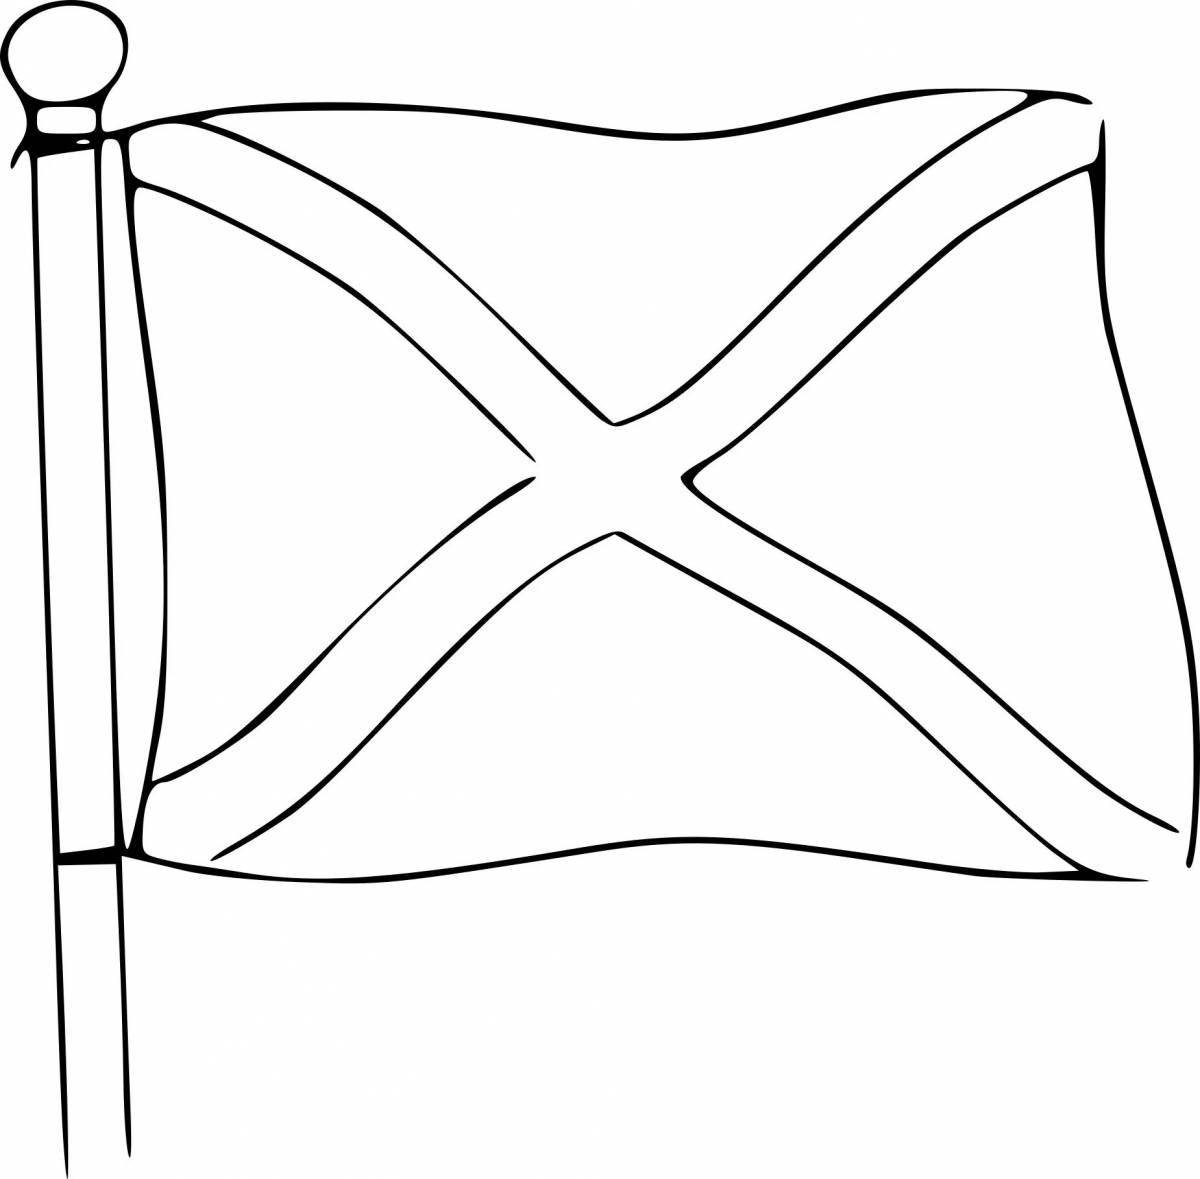 Coloring page bold scotland flag